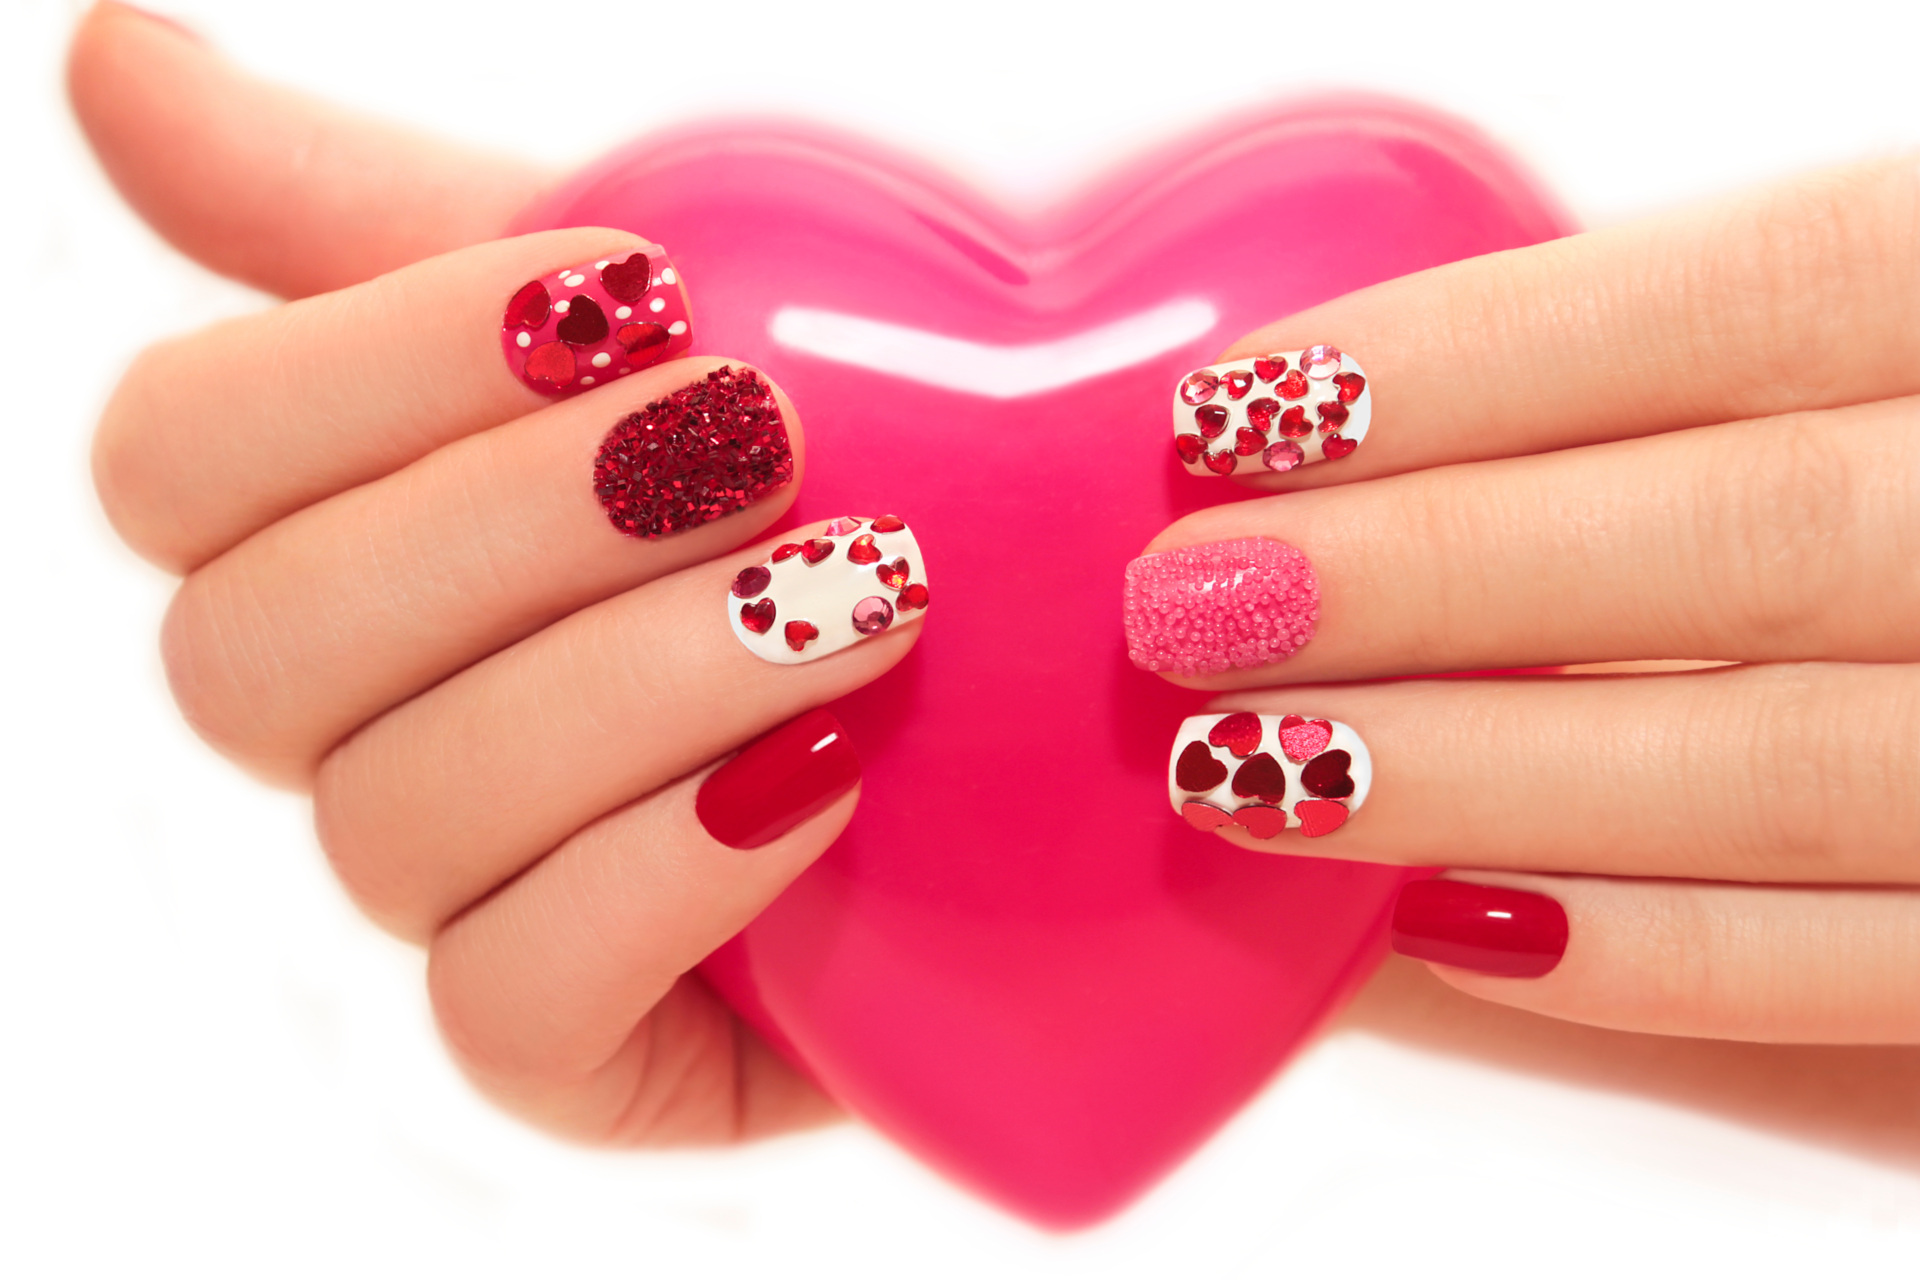 Manicure with rhinestones in the shape of hearts and pink balls on white and red nail Polish on a white background.